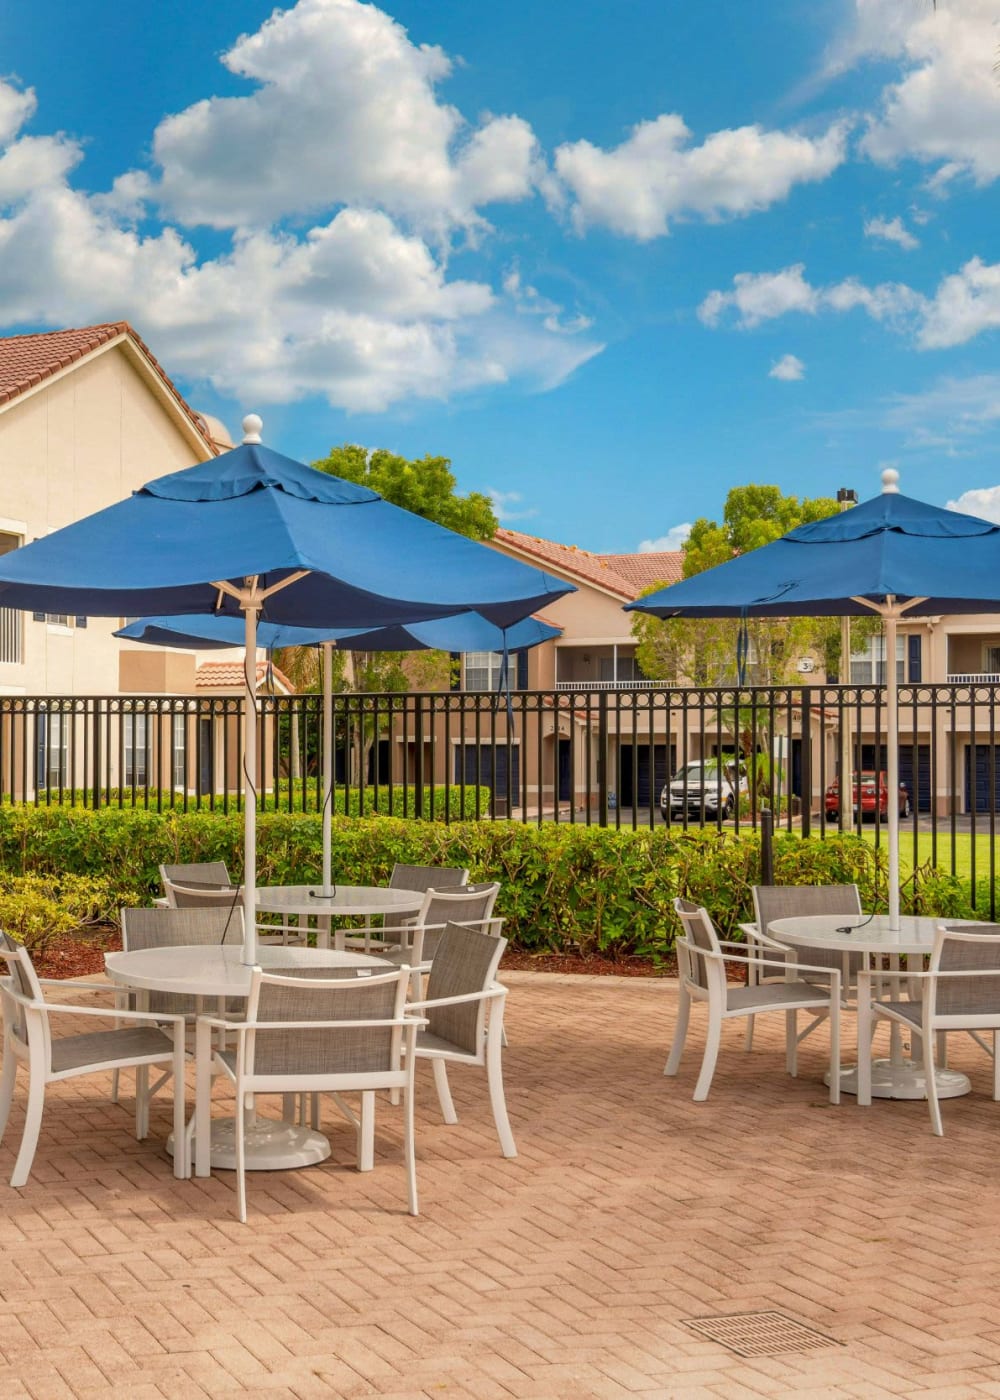 Patio with tables and chairs at The Estates at Wellington Green Apartments, Wellington, Florida